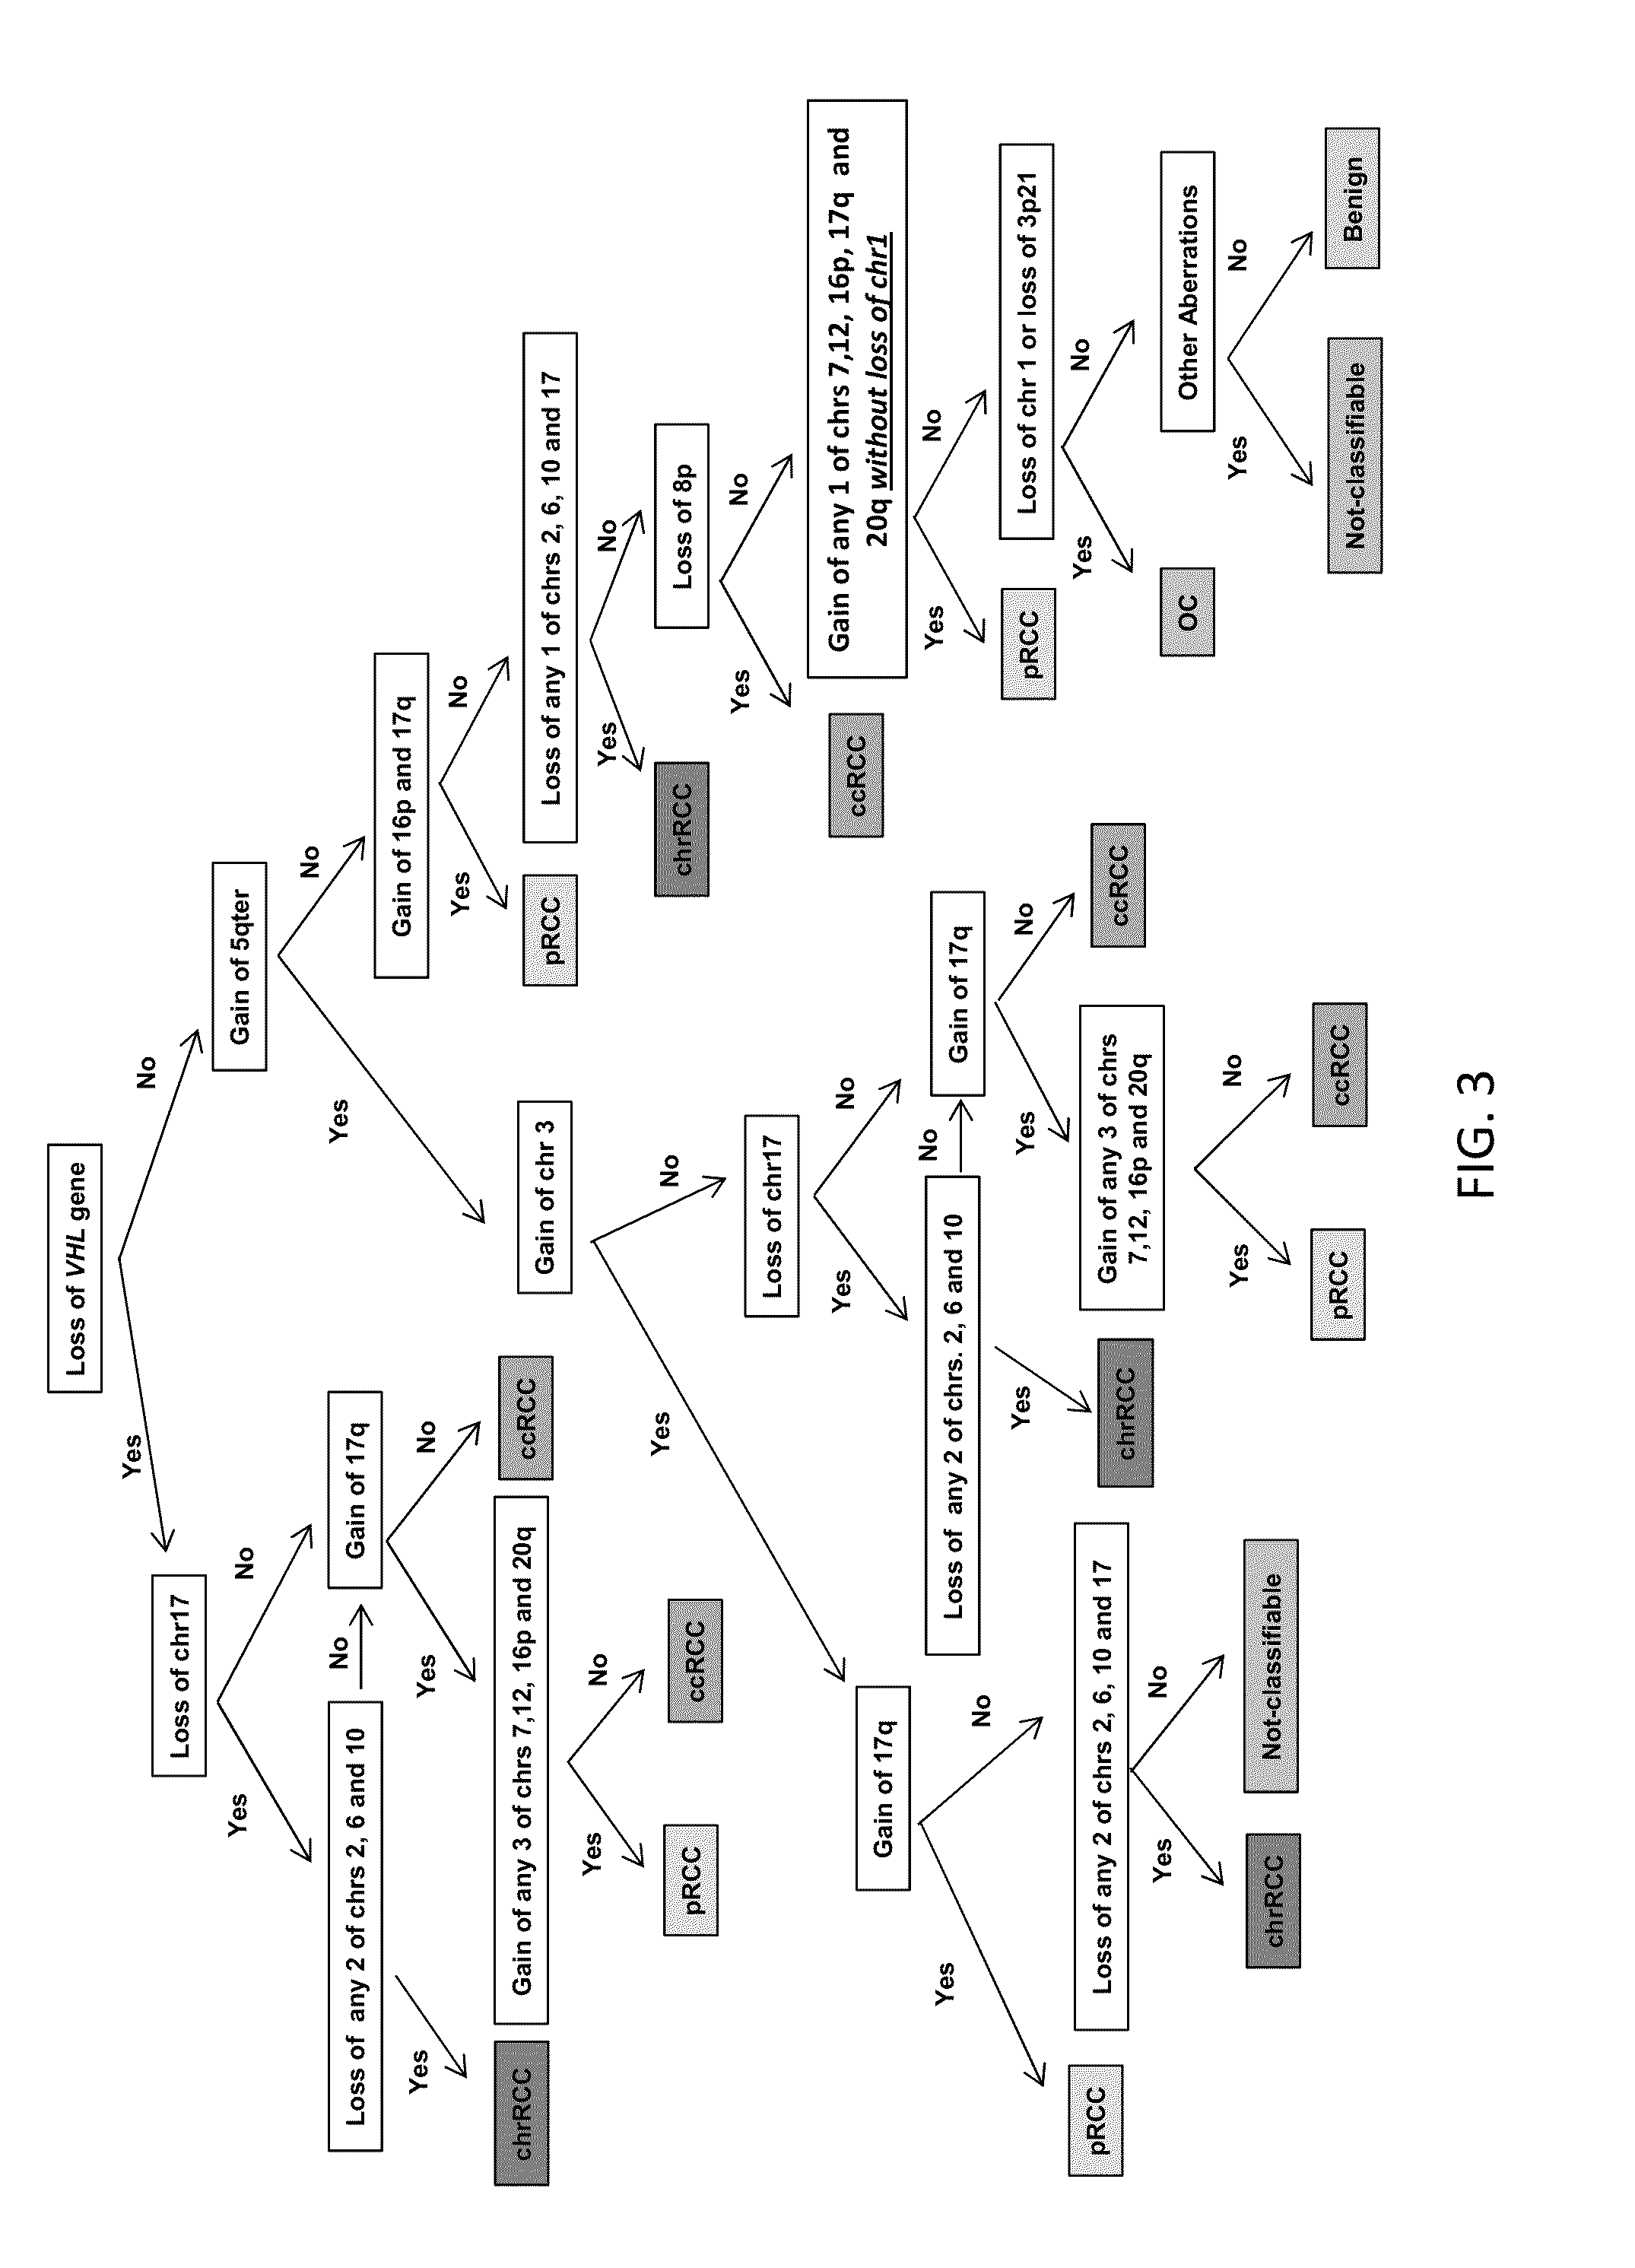 Methods and tools for the diagnosis and prognosis of urogenital cancers